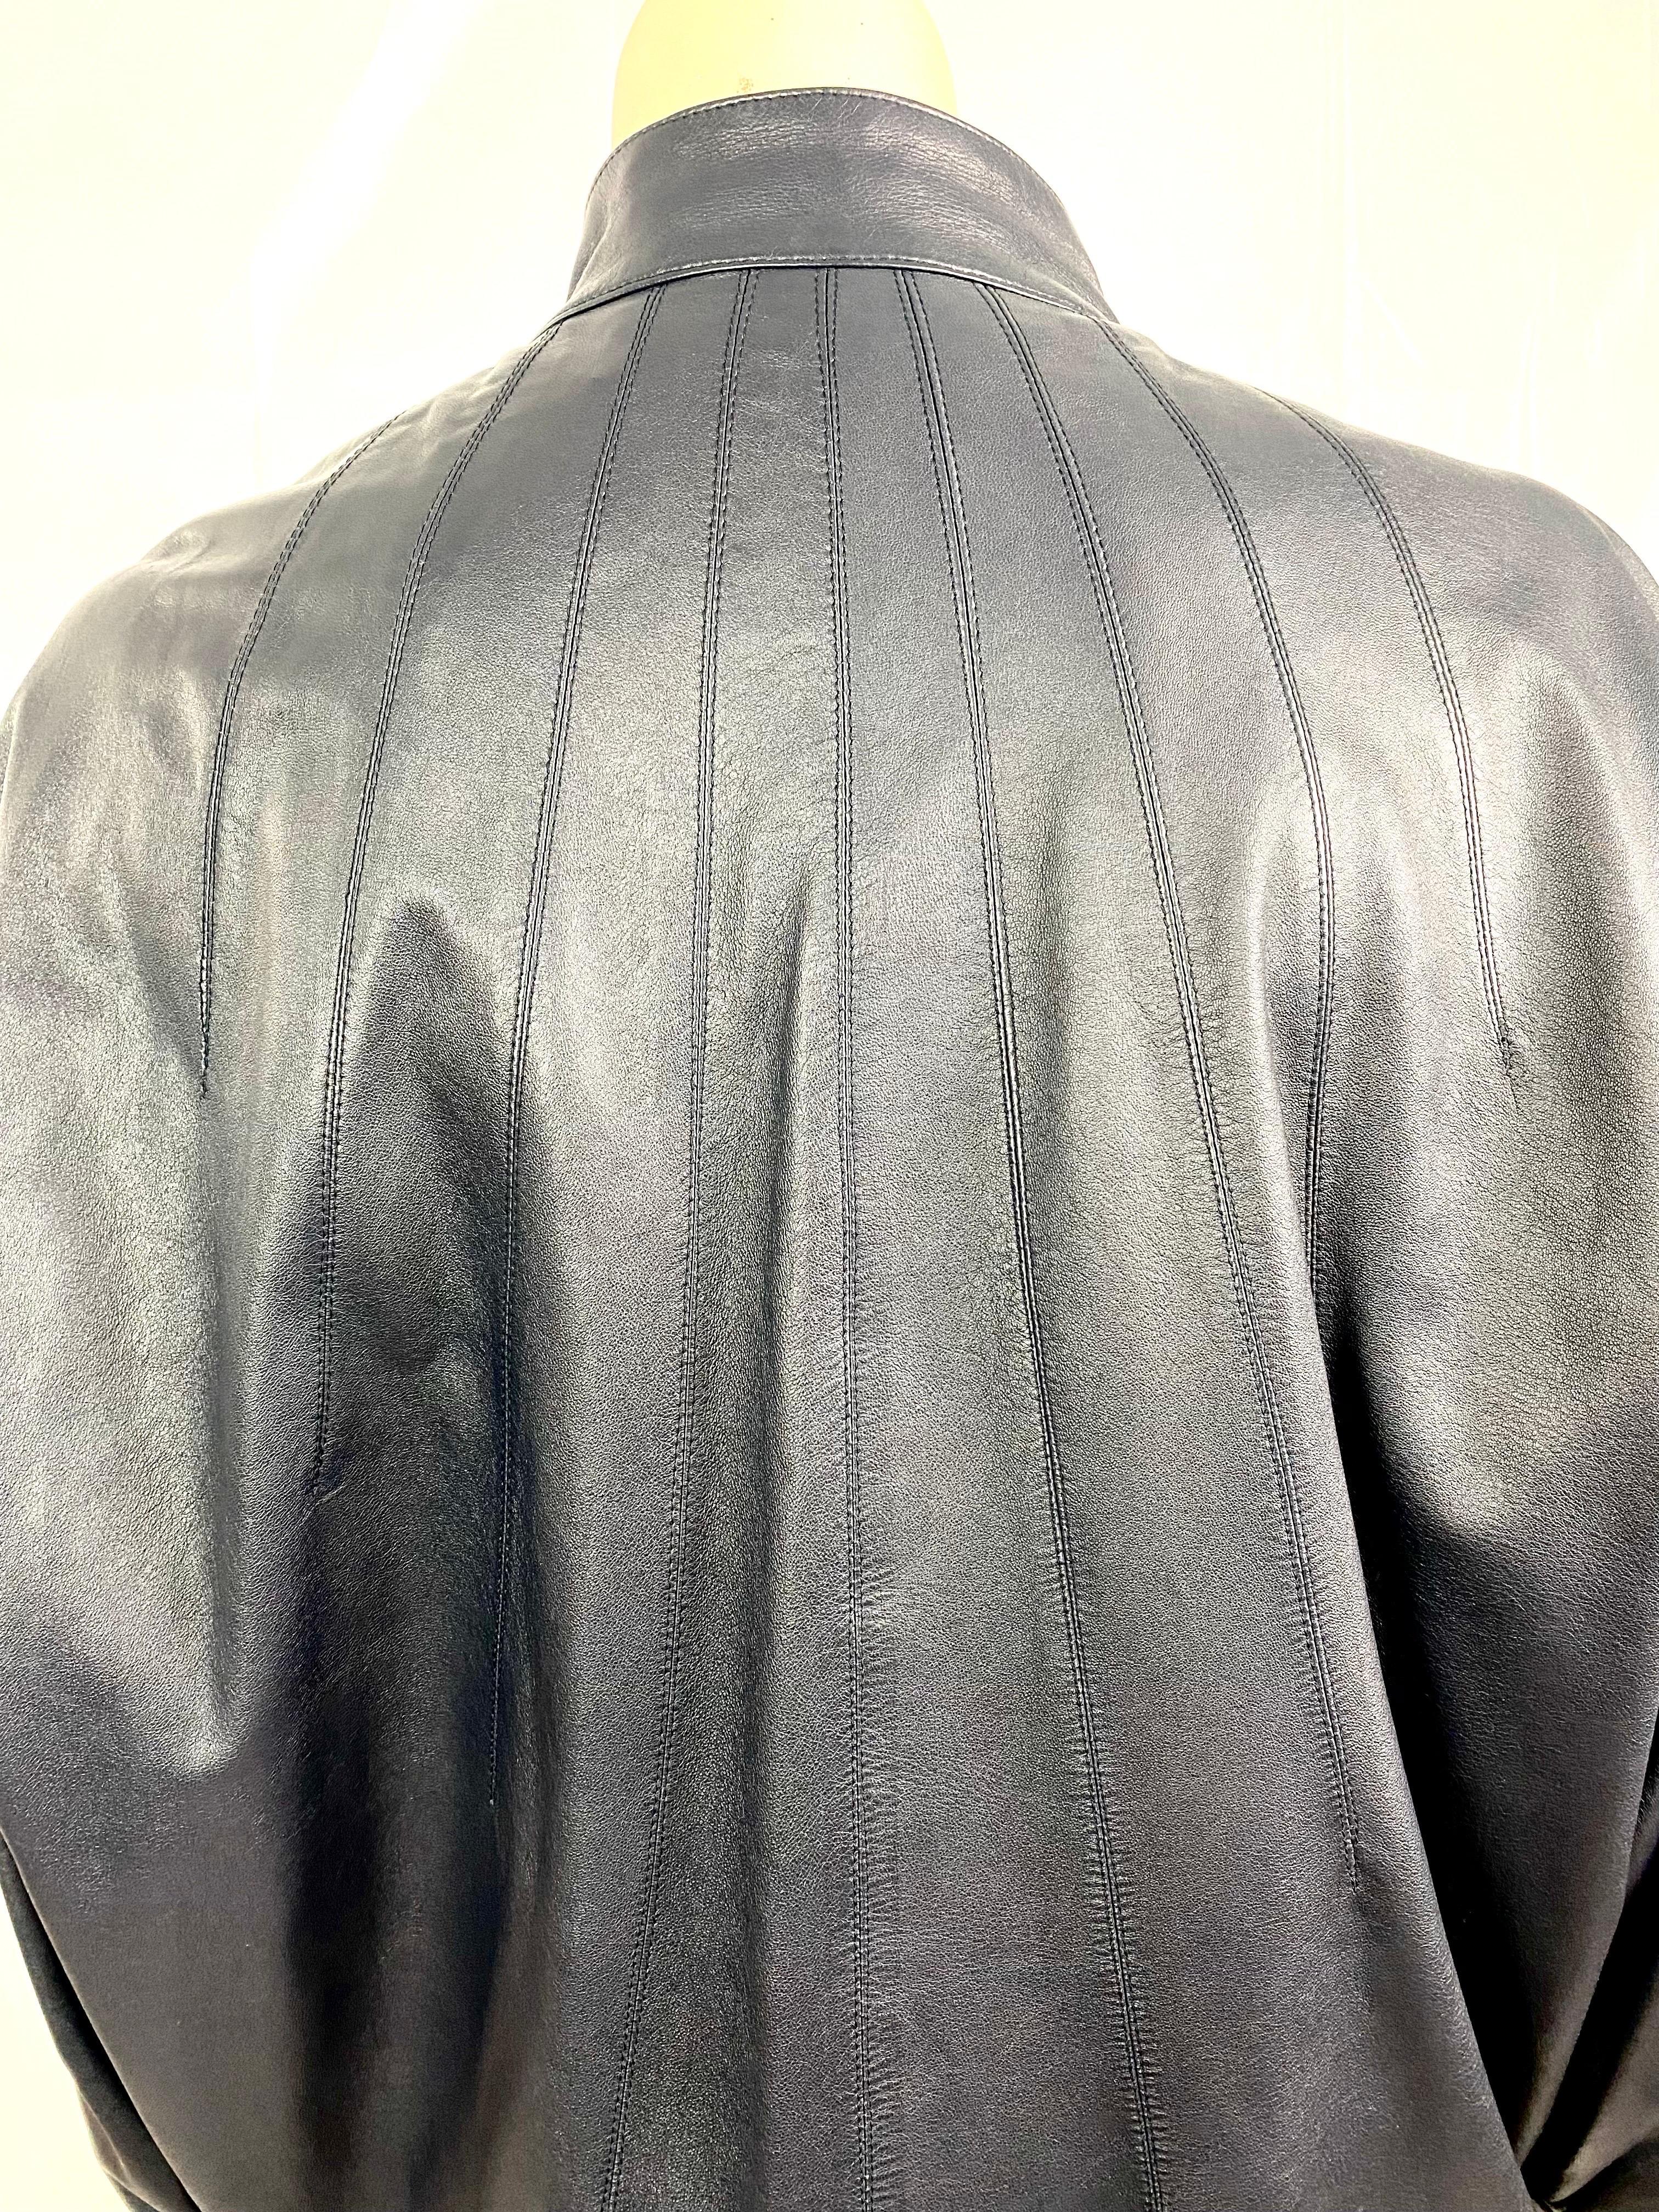 Vintage lamb leather jacket by Yves saint laurent rive gauche  from the 1980s 3